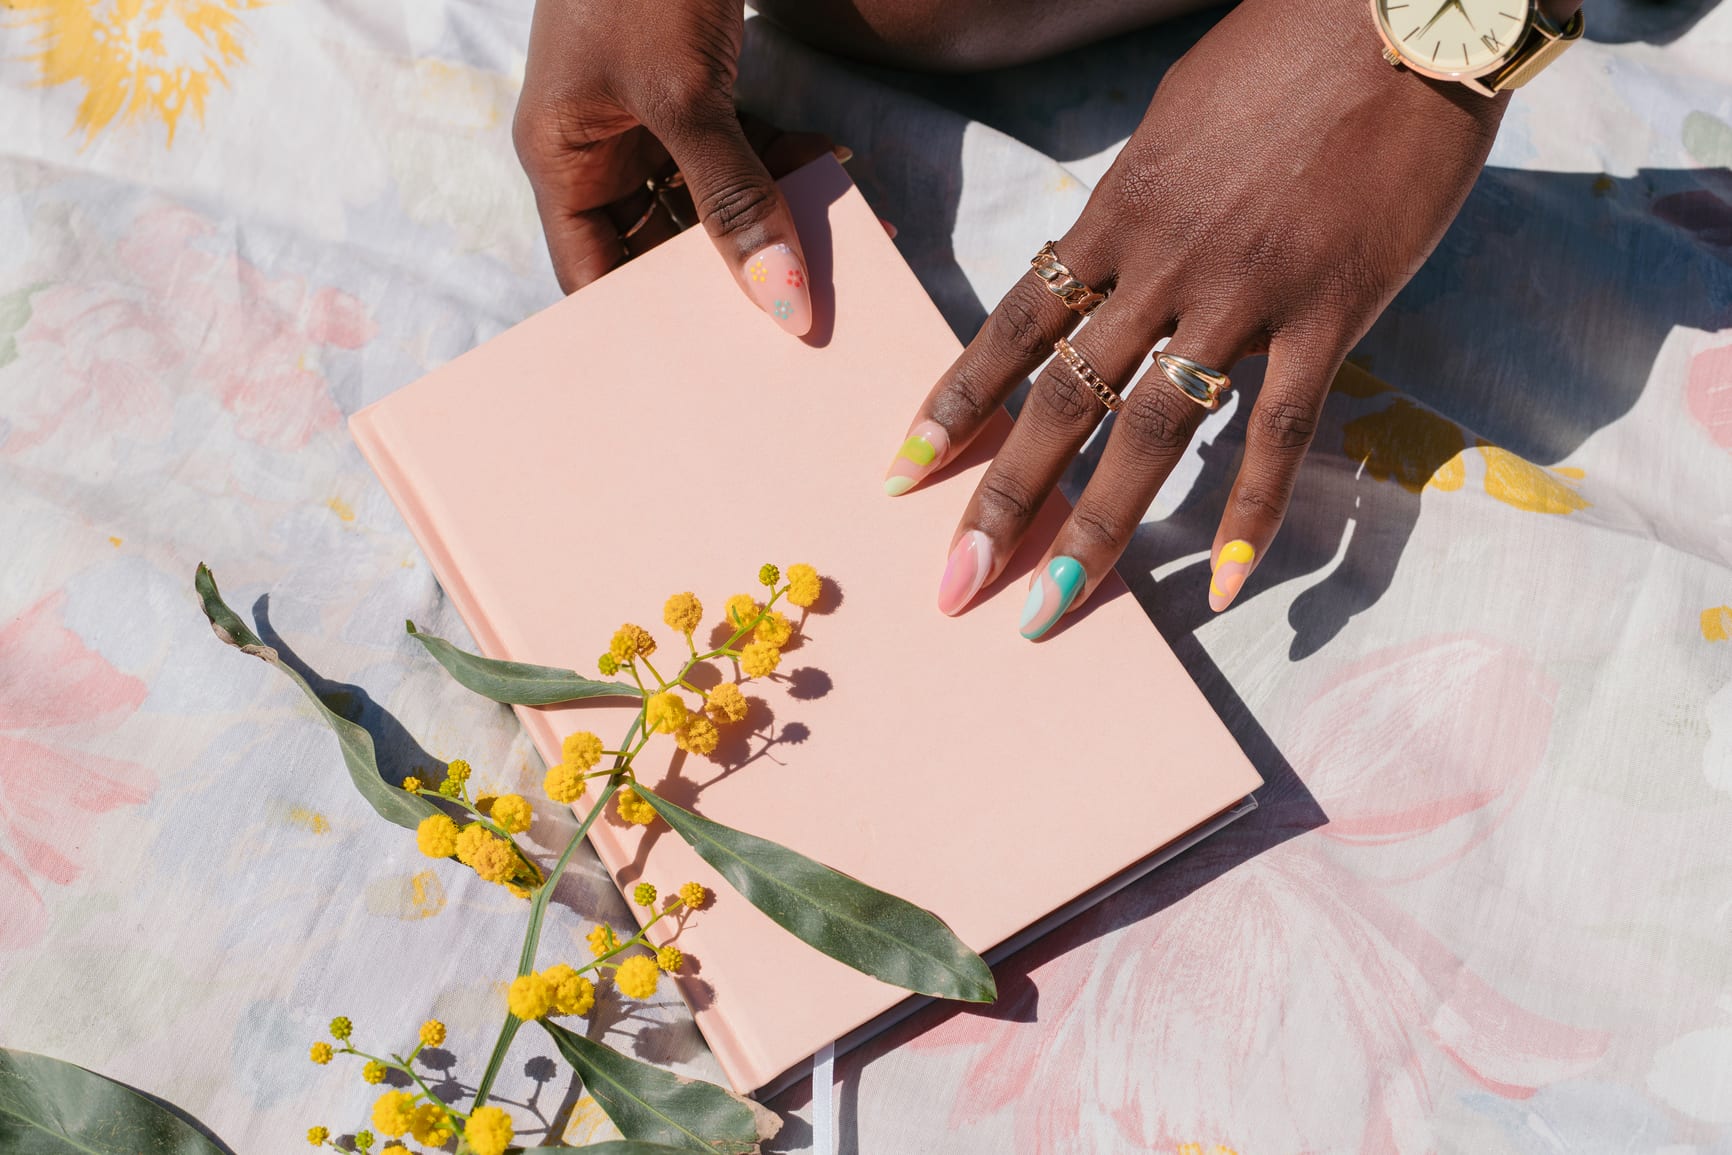 Black female hands with rings and colorful nails, holding a pastel pink notebook.